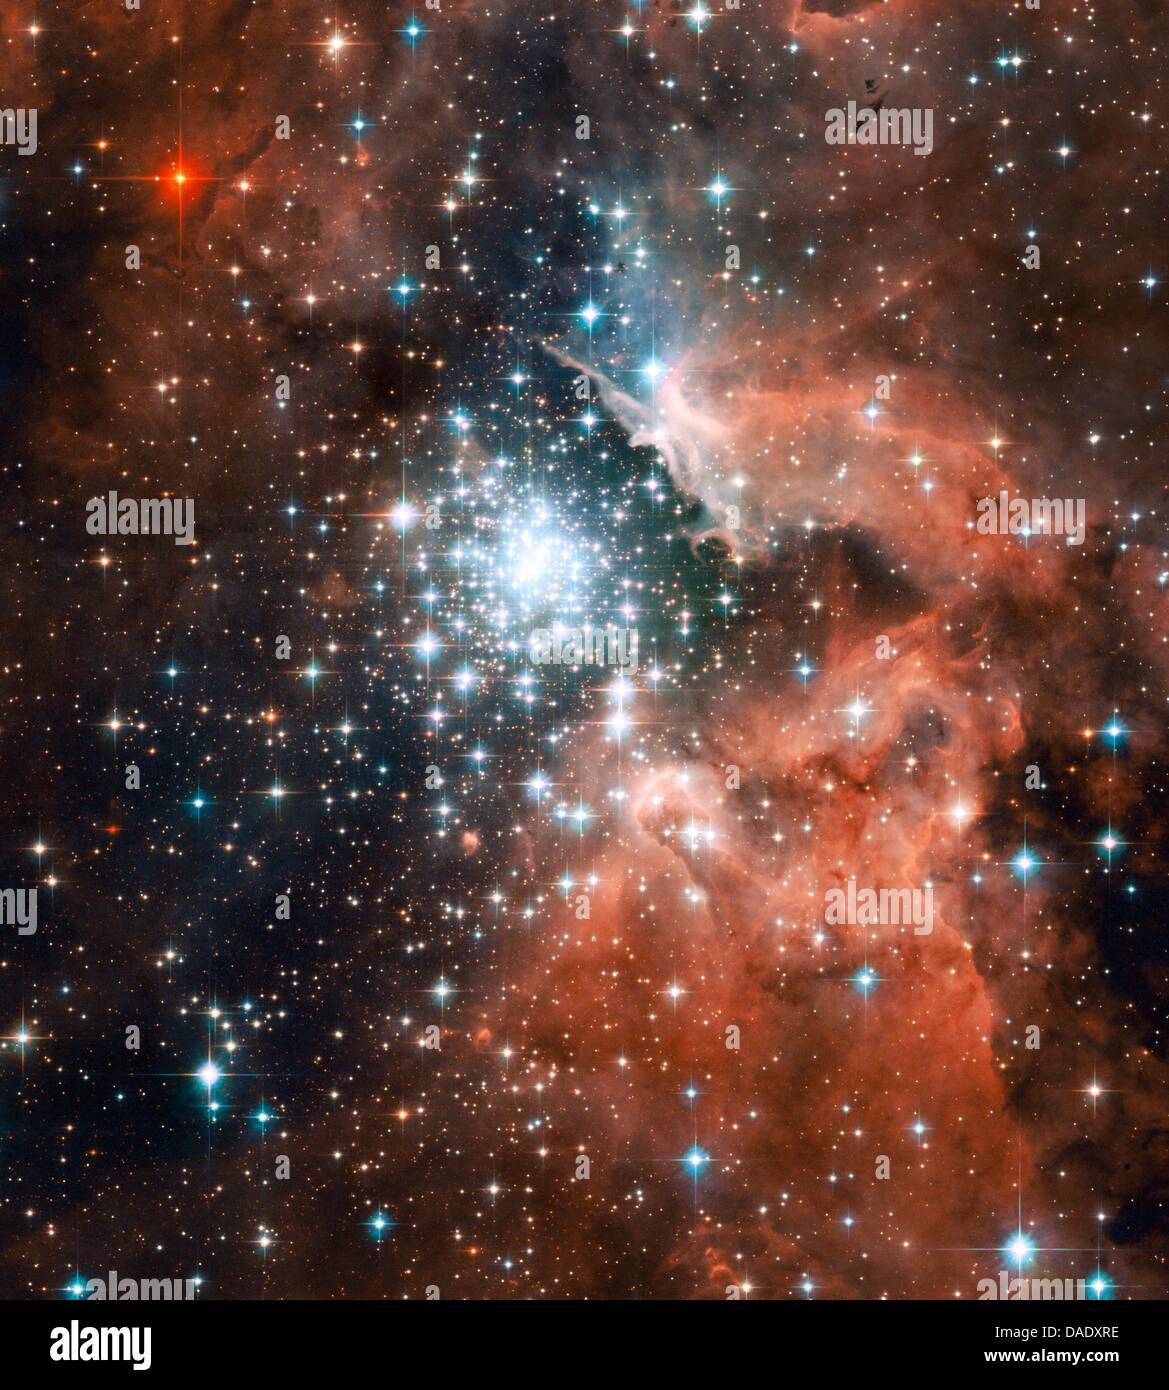 Thousands of sparkling young stars nestled within the giant nebula NGC 3603. This stellar 'jewel box' is one of the most massive young star clusters in the Milky Way Galaxy. NGC 3603 is a prominent star-forming region in the Carina spiral arm of the Milky Way, about 20,000 light-years away. This image shows a young star cluster surrounded by a vast region of dust and gas. The image Stock Photo